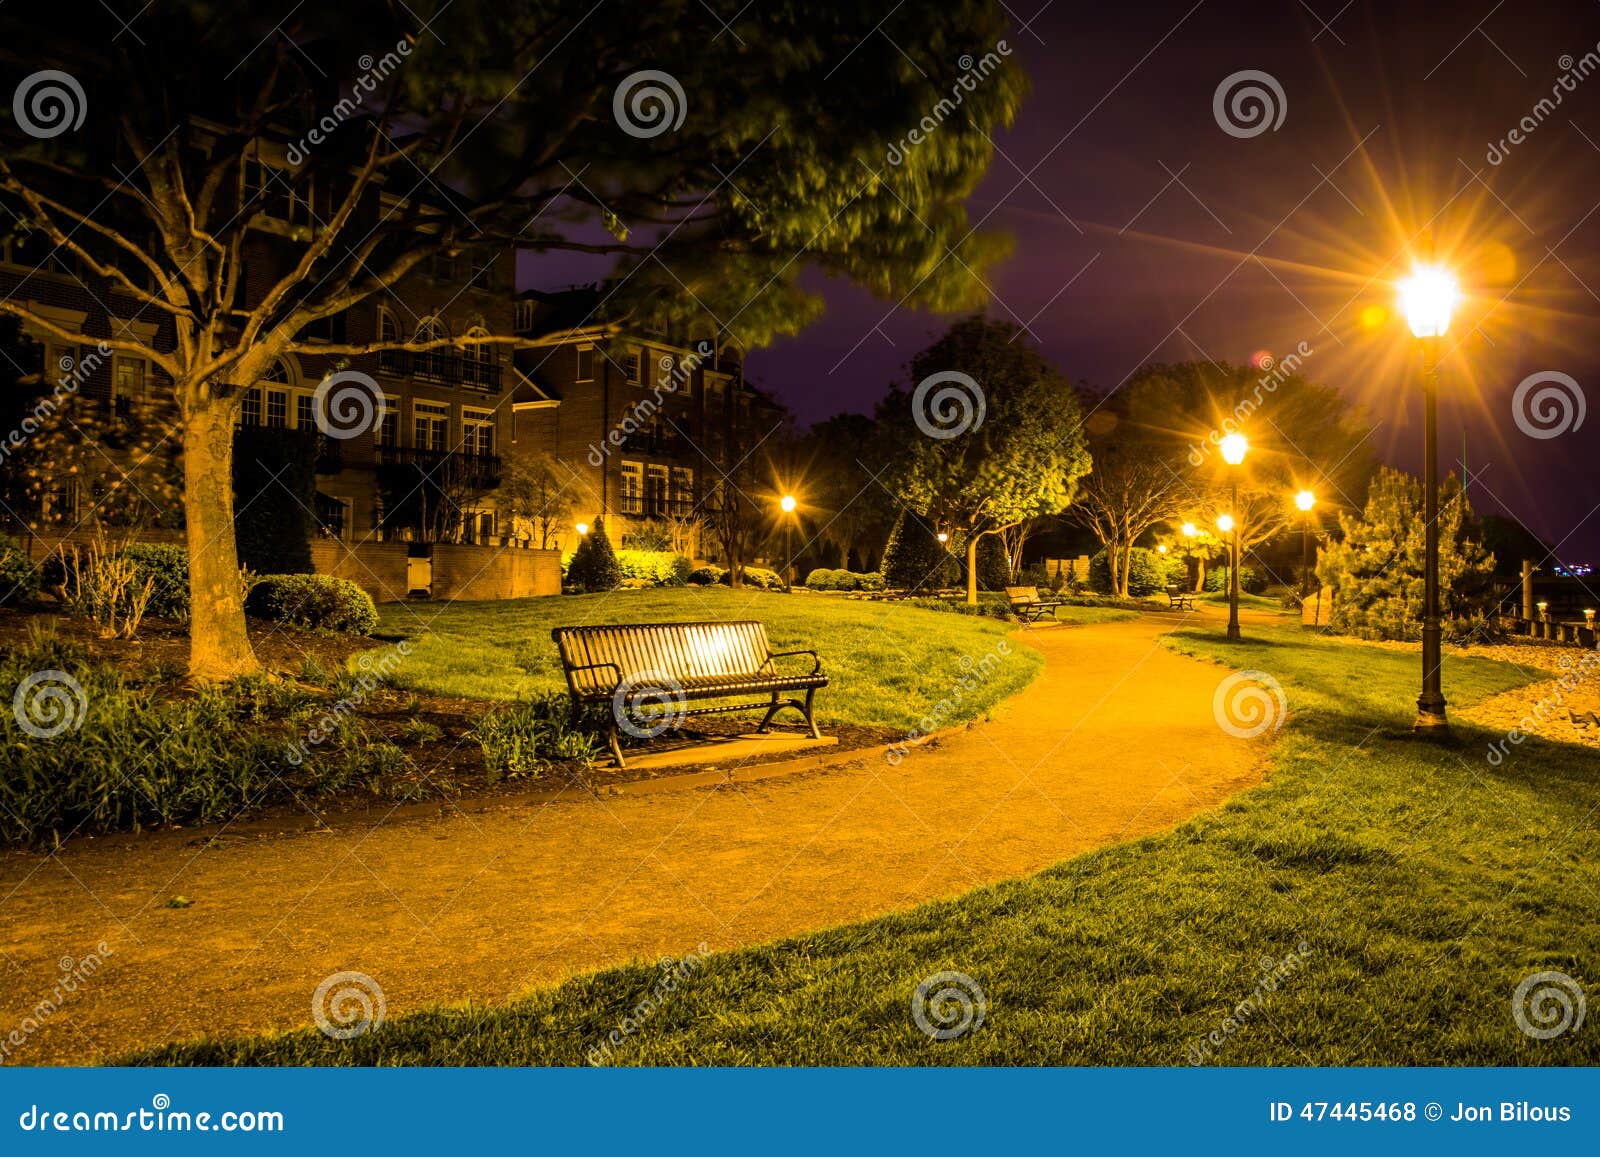 path at night in a park in alexandria, virginia.